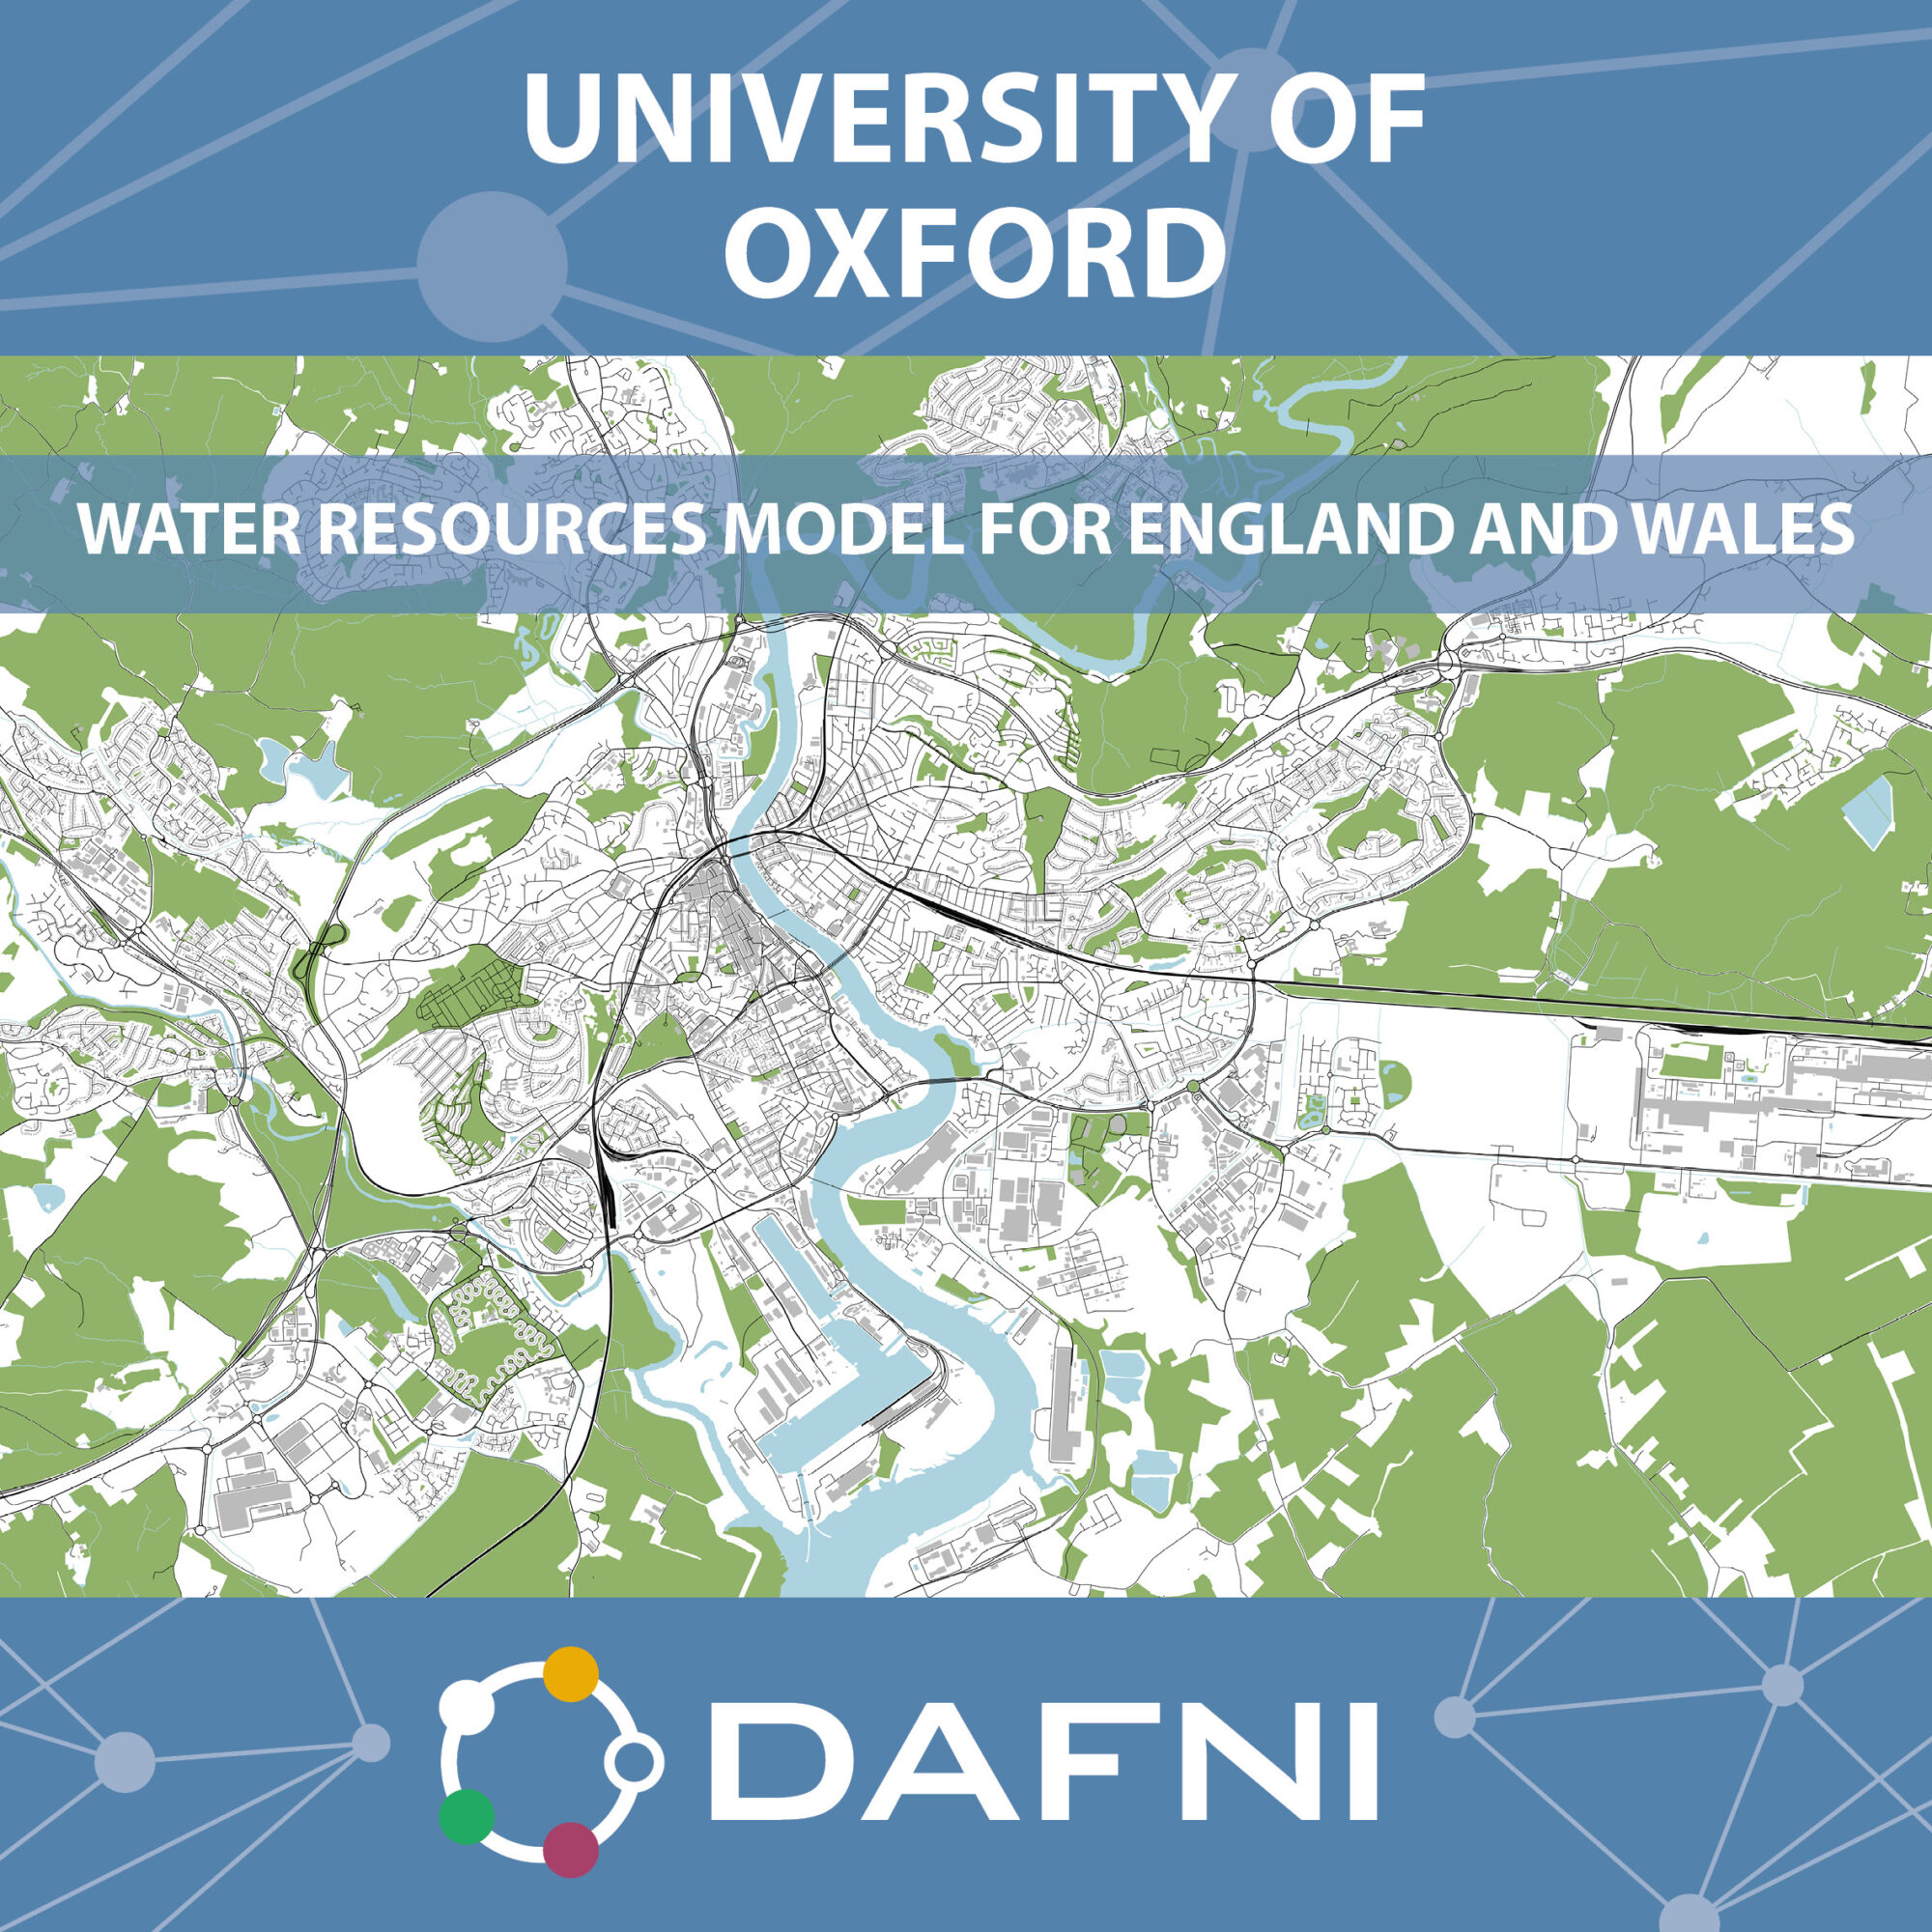 University of Oxford - Water resources model for England and Wales